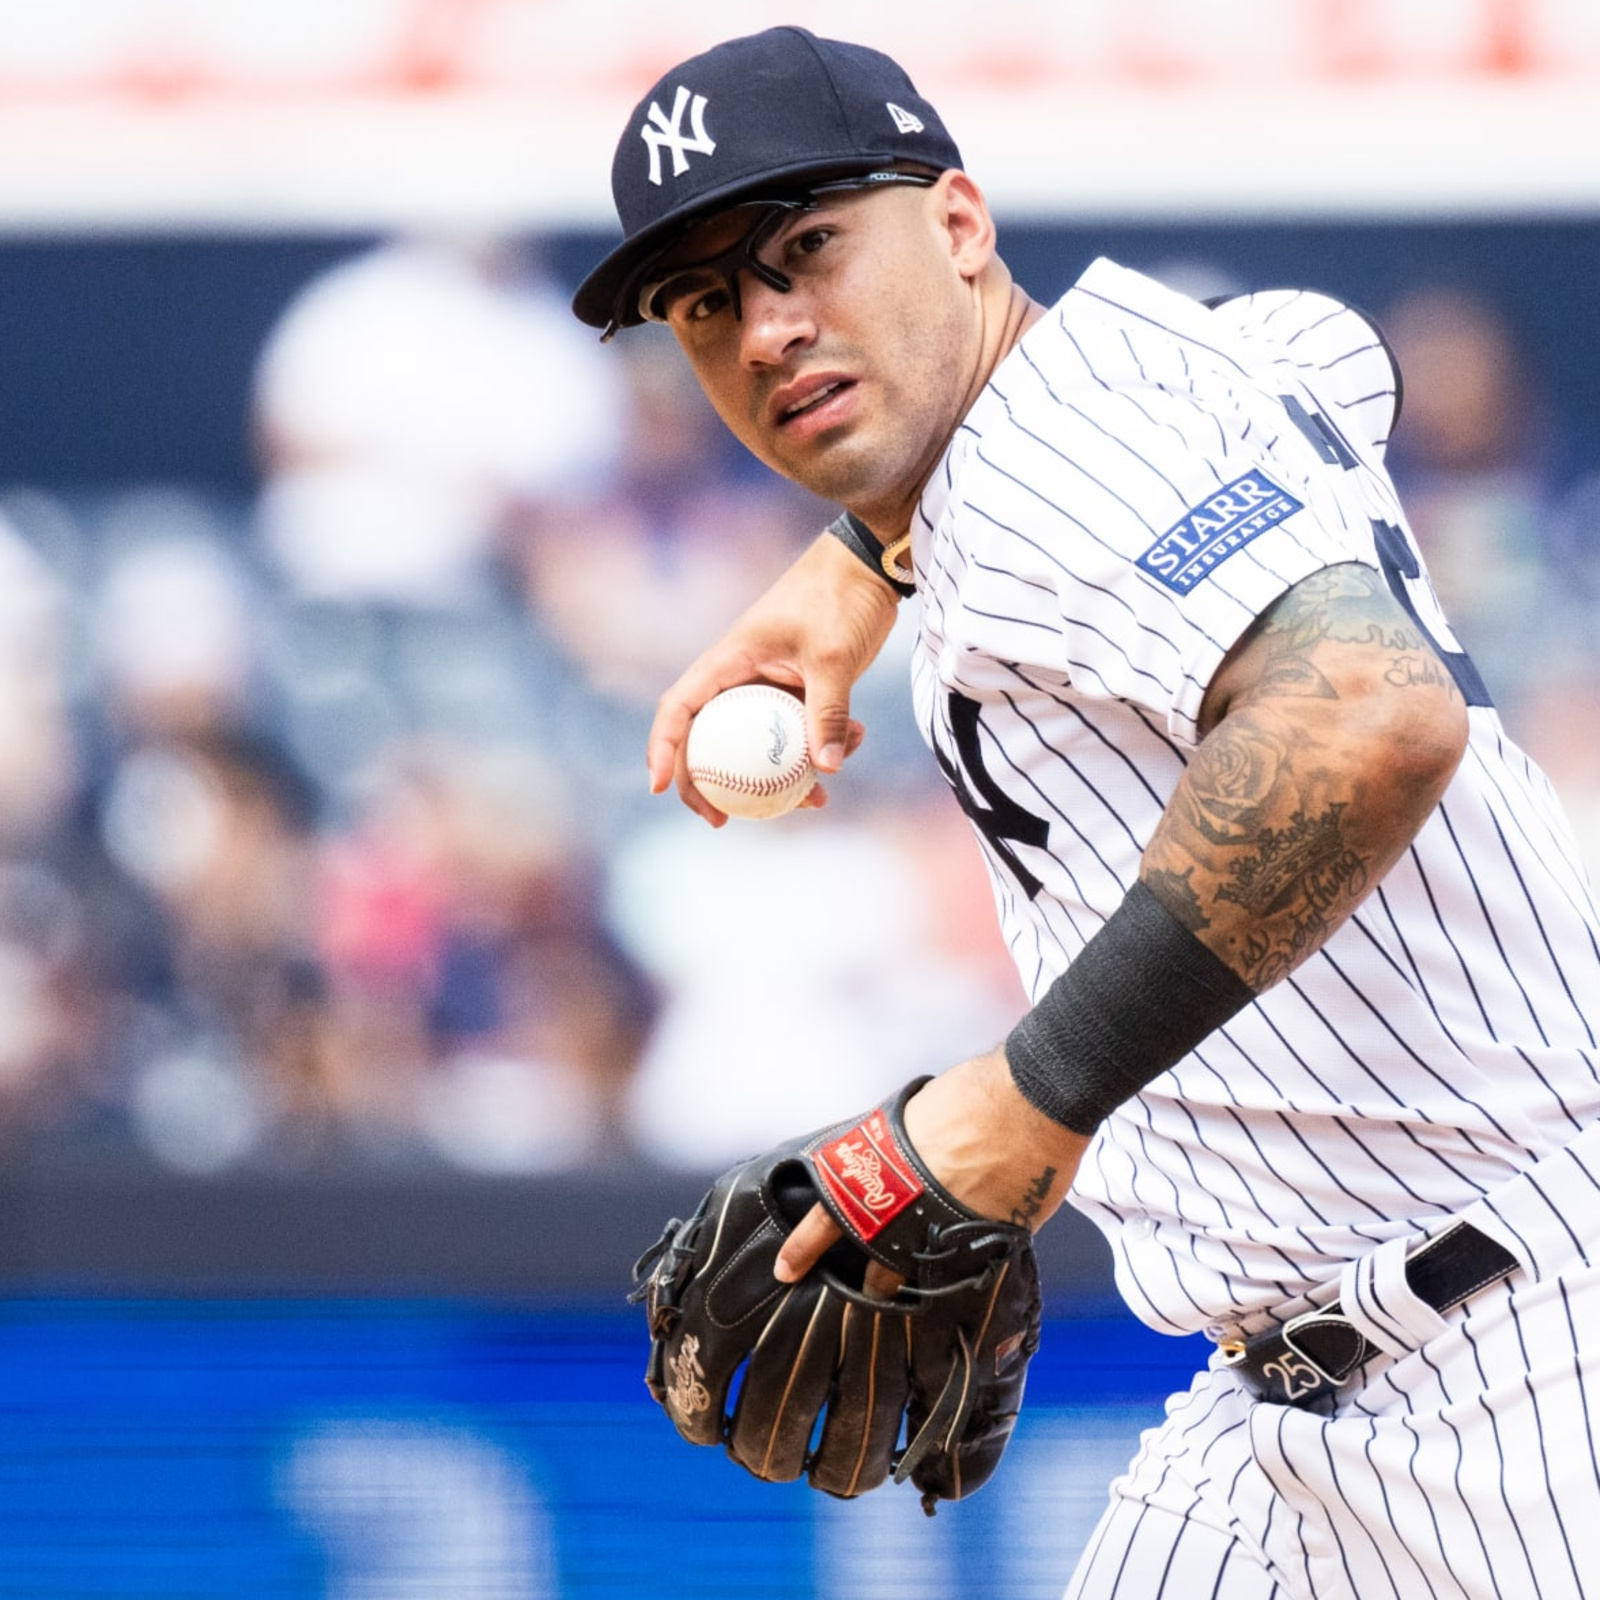 Gleyber Torres's Injury Dampens a Yankees Victory Over the Braves